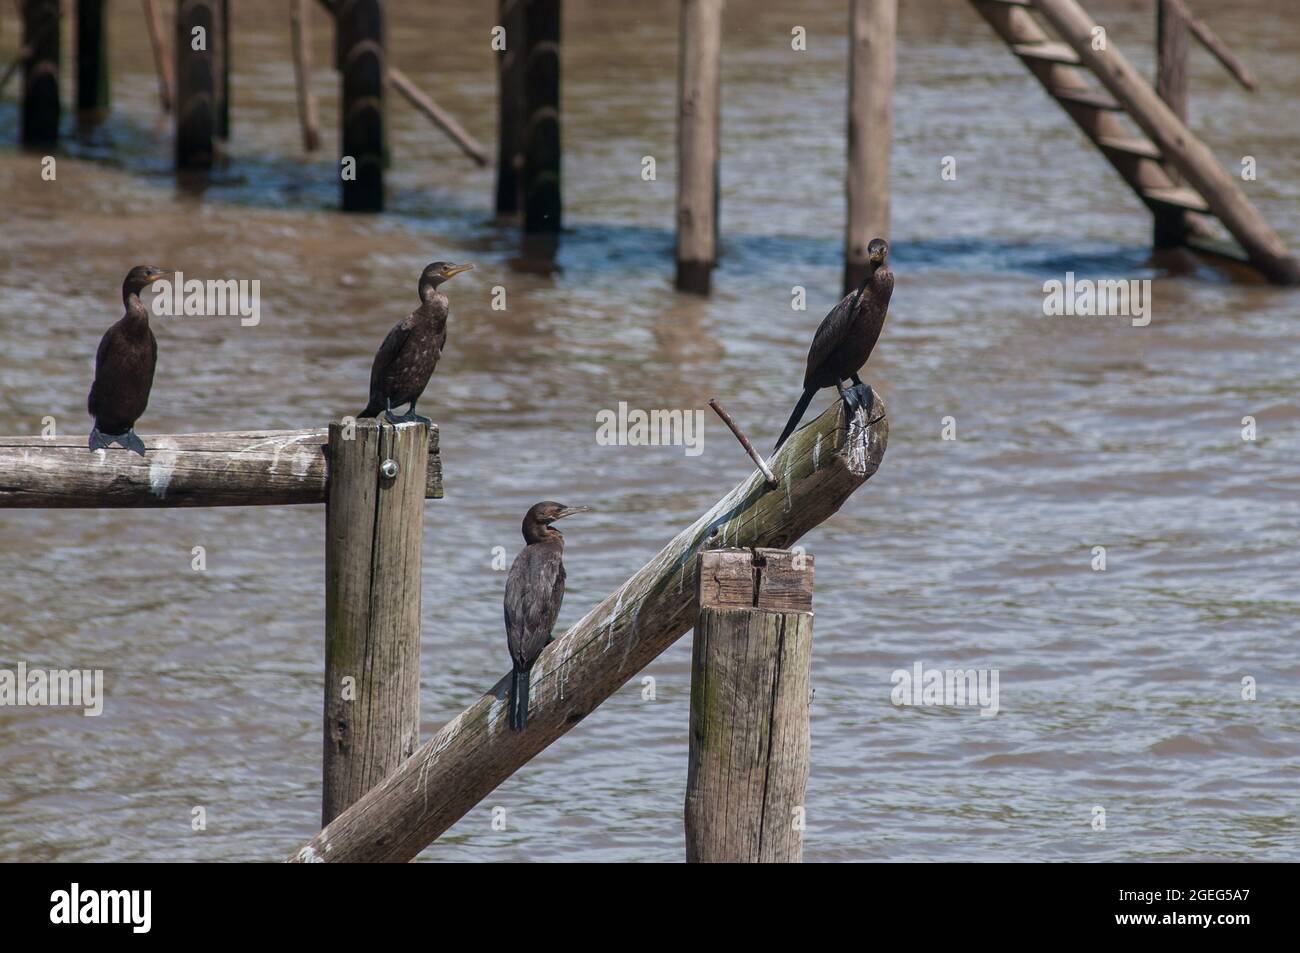 Group of neotropical cormorant birds, Phalacrocorax olivaceus, standing on wooden poles in a lake Stock Photo